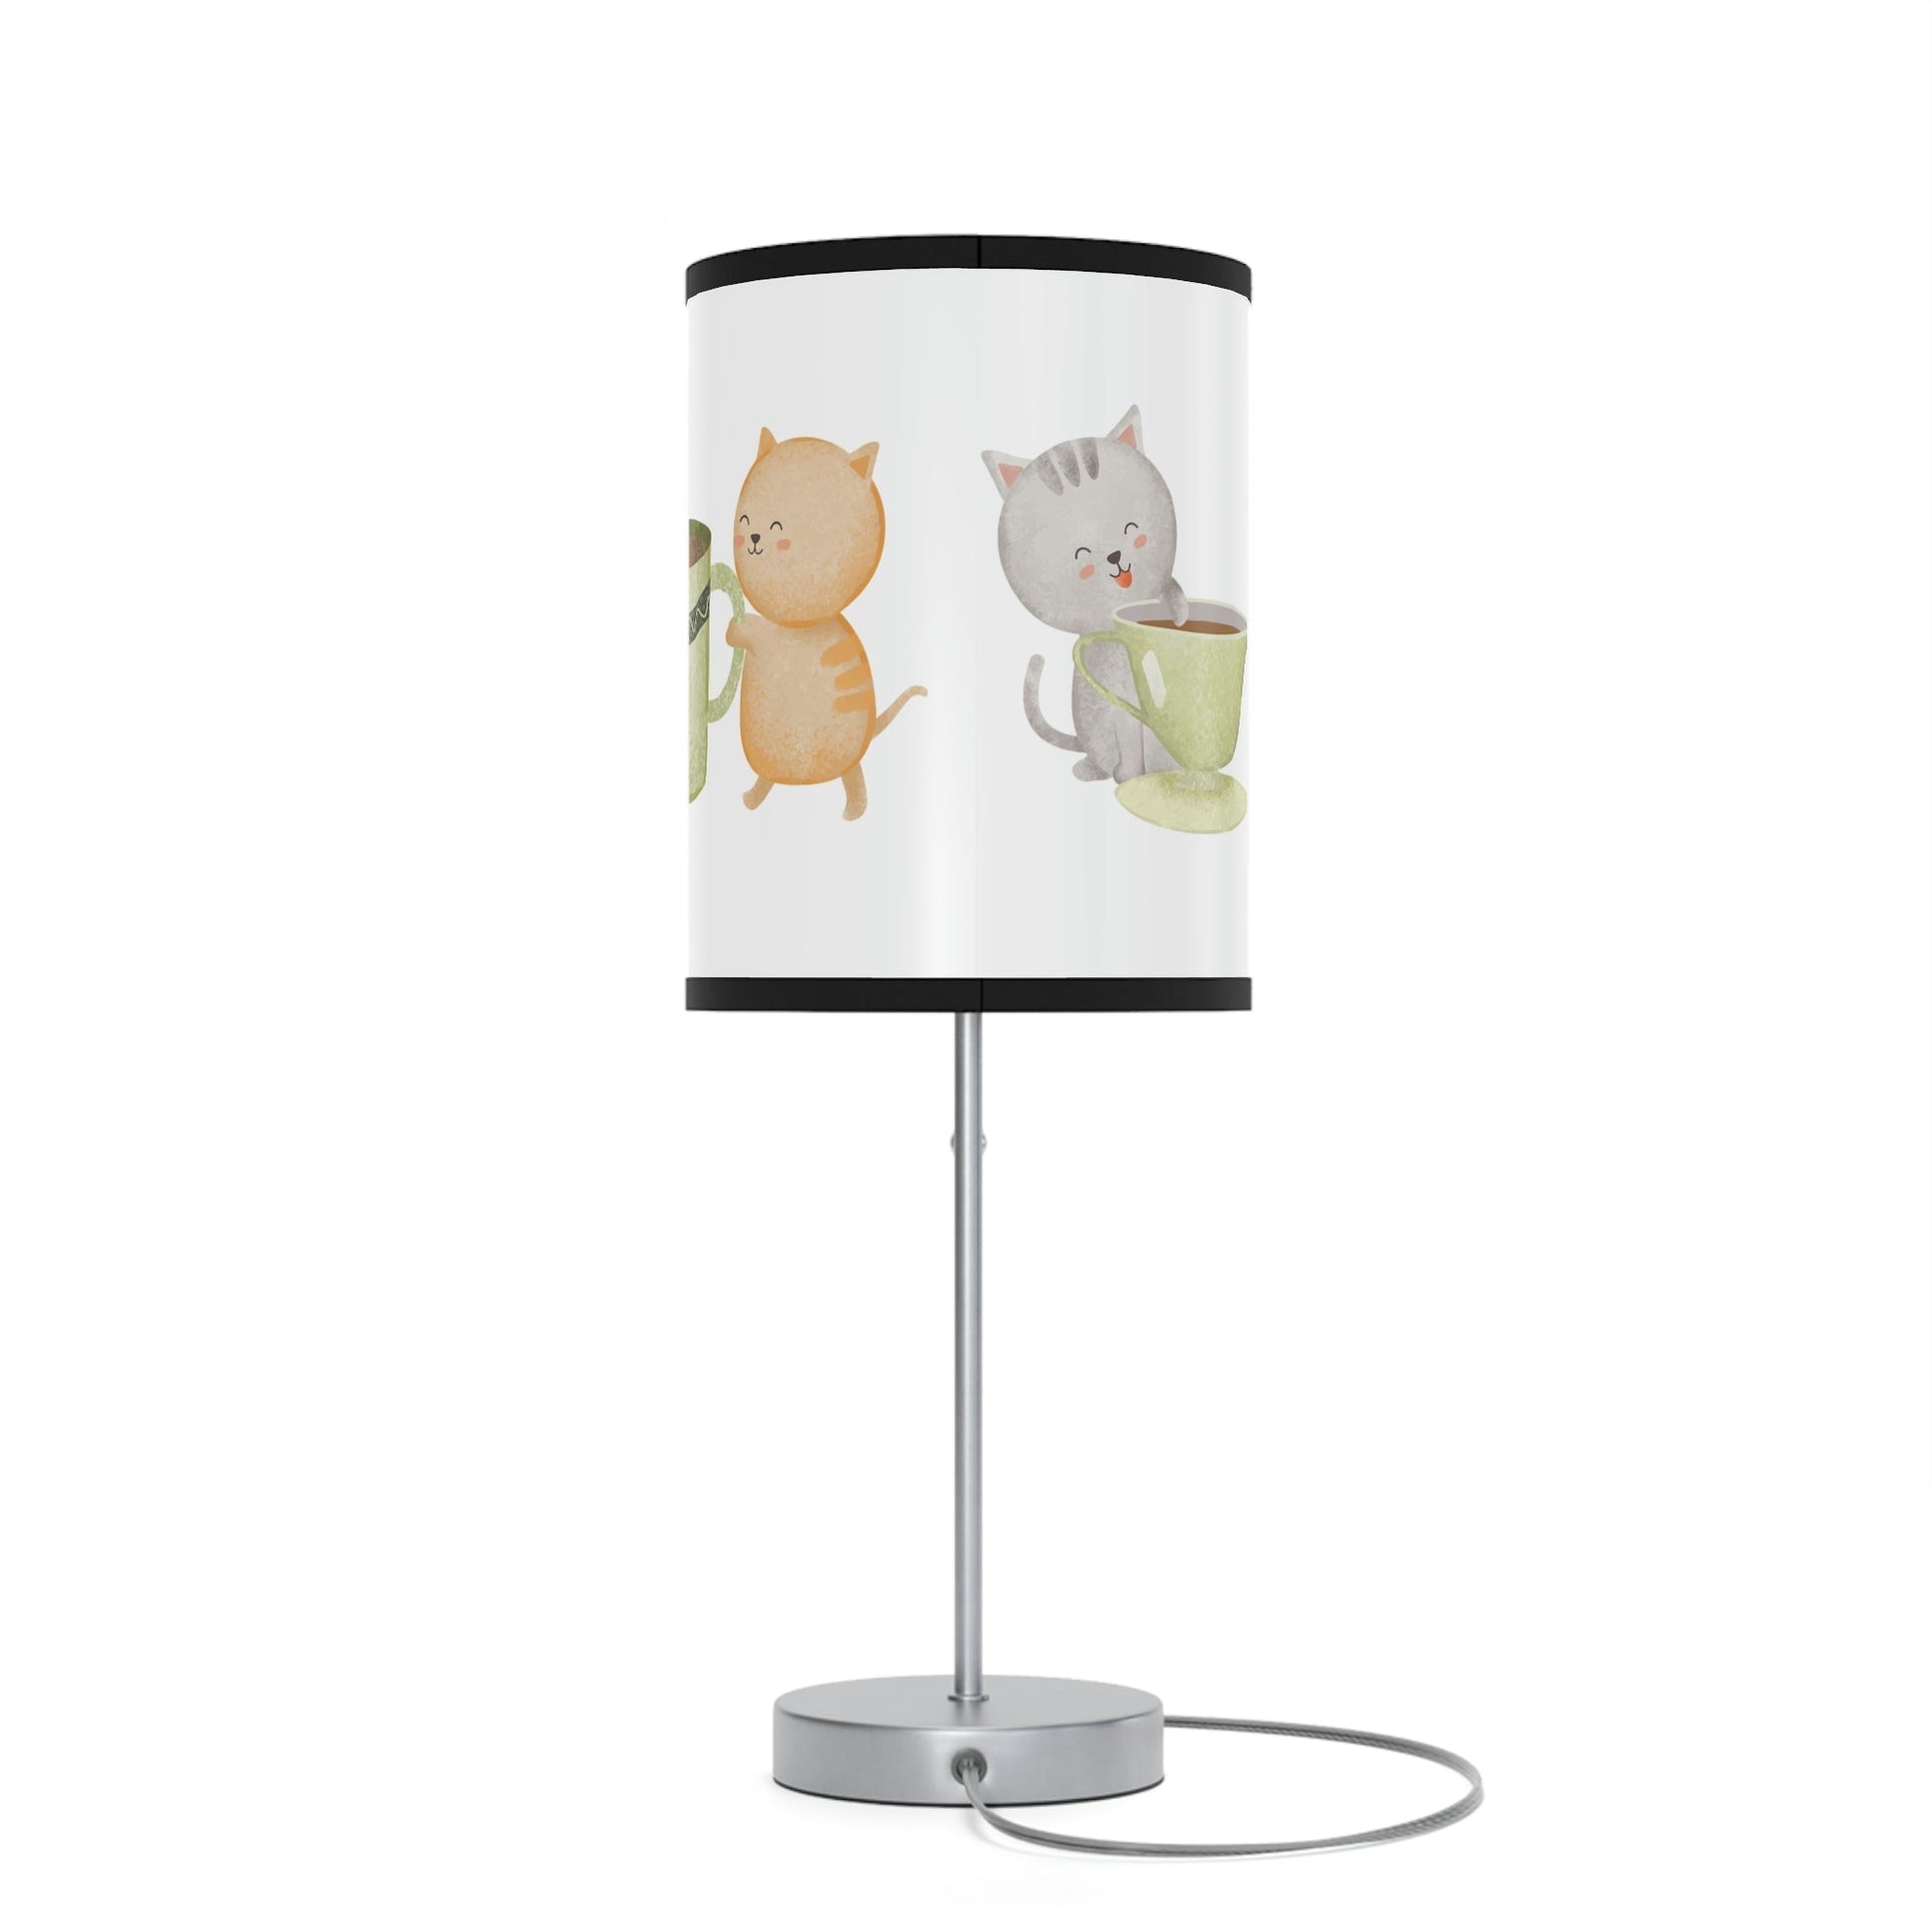 Cute Watercolor Cats & Cups Lamp, Cat Accent Lamp, Unique Kitchen or Girls Room - FlooredByArt